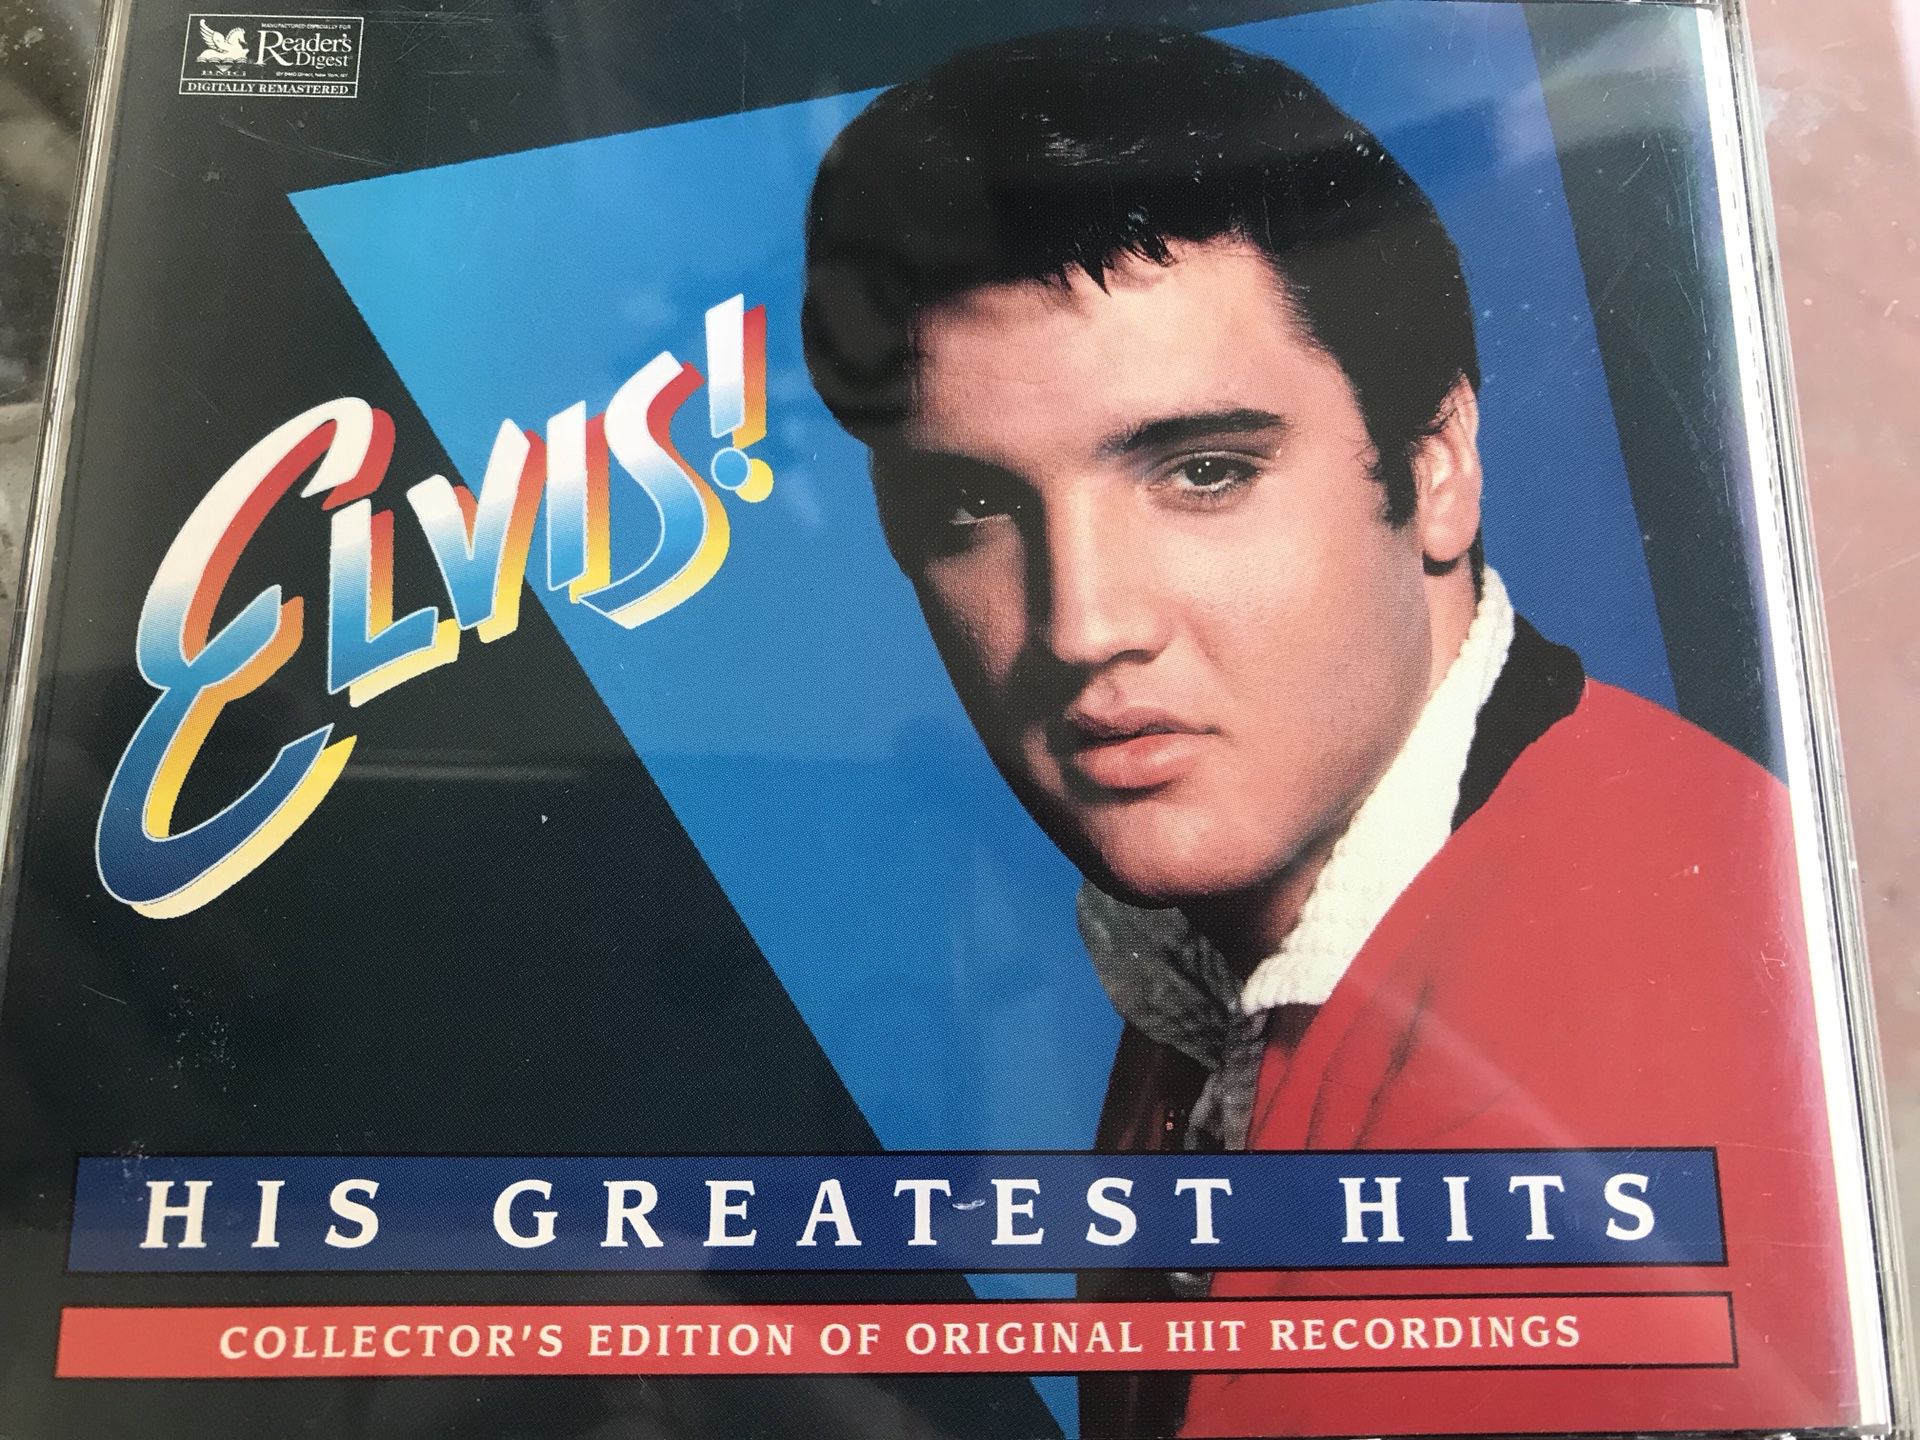 Elvis! His greatest hits, 4 CD Reader Digest Collection (84 songs)